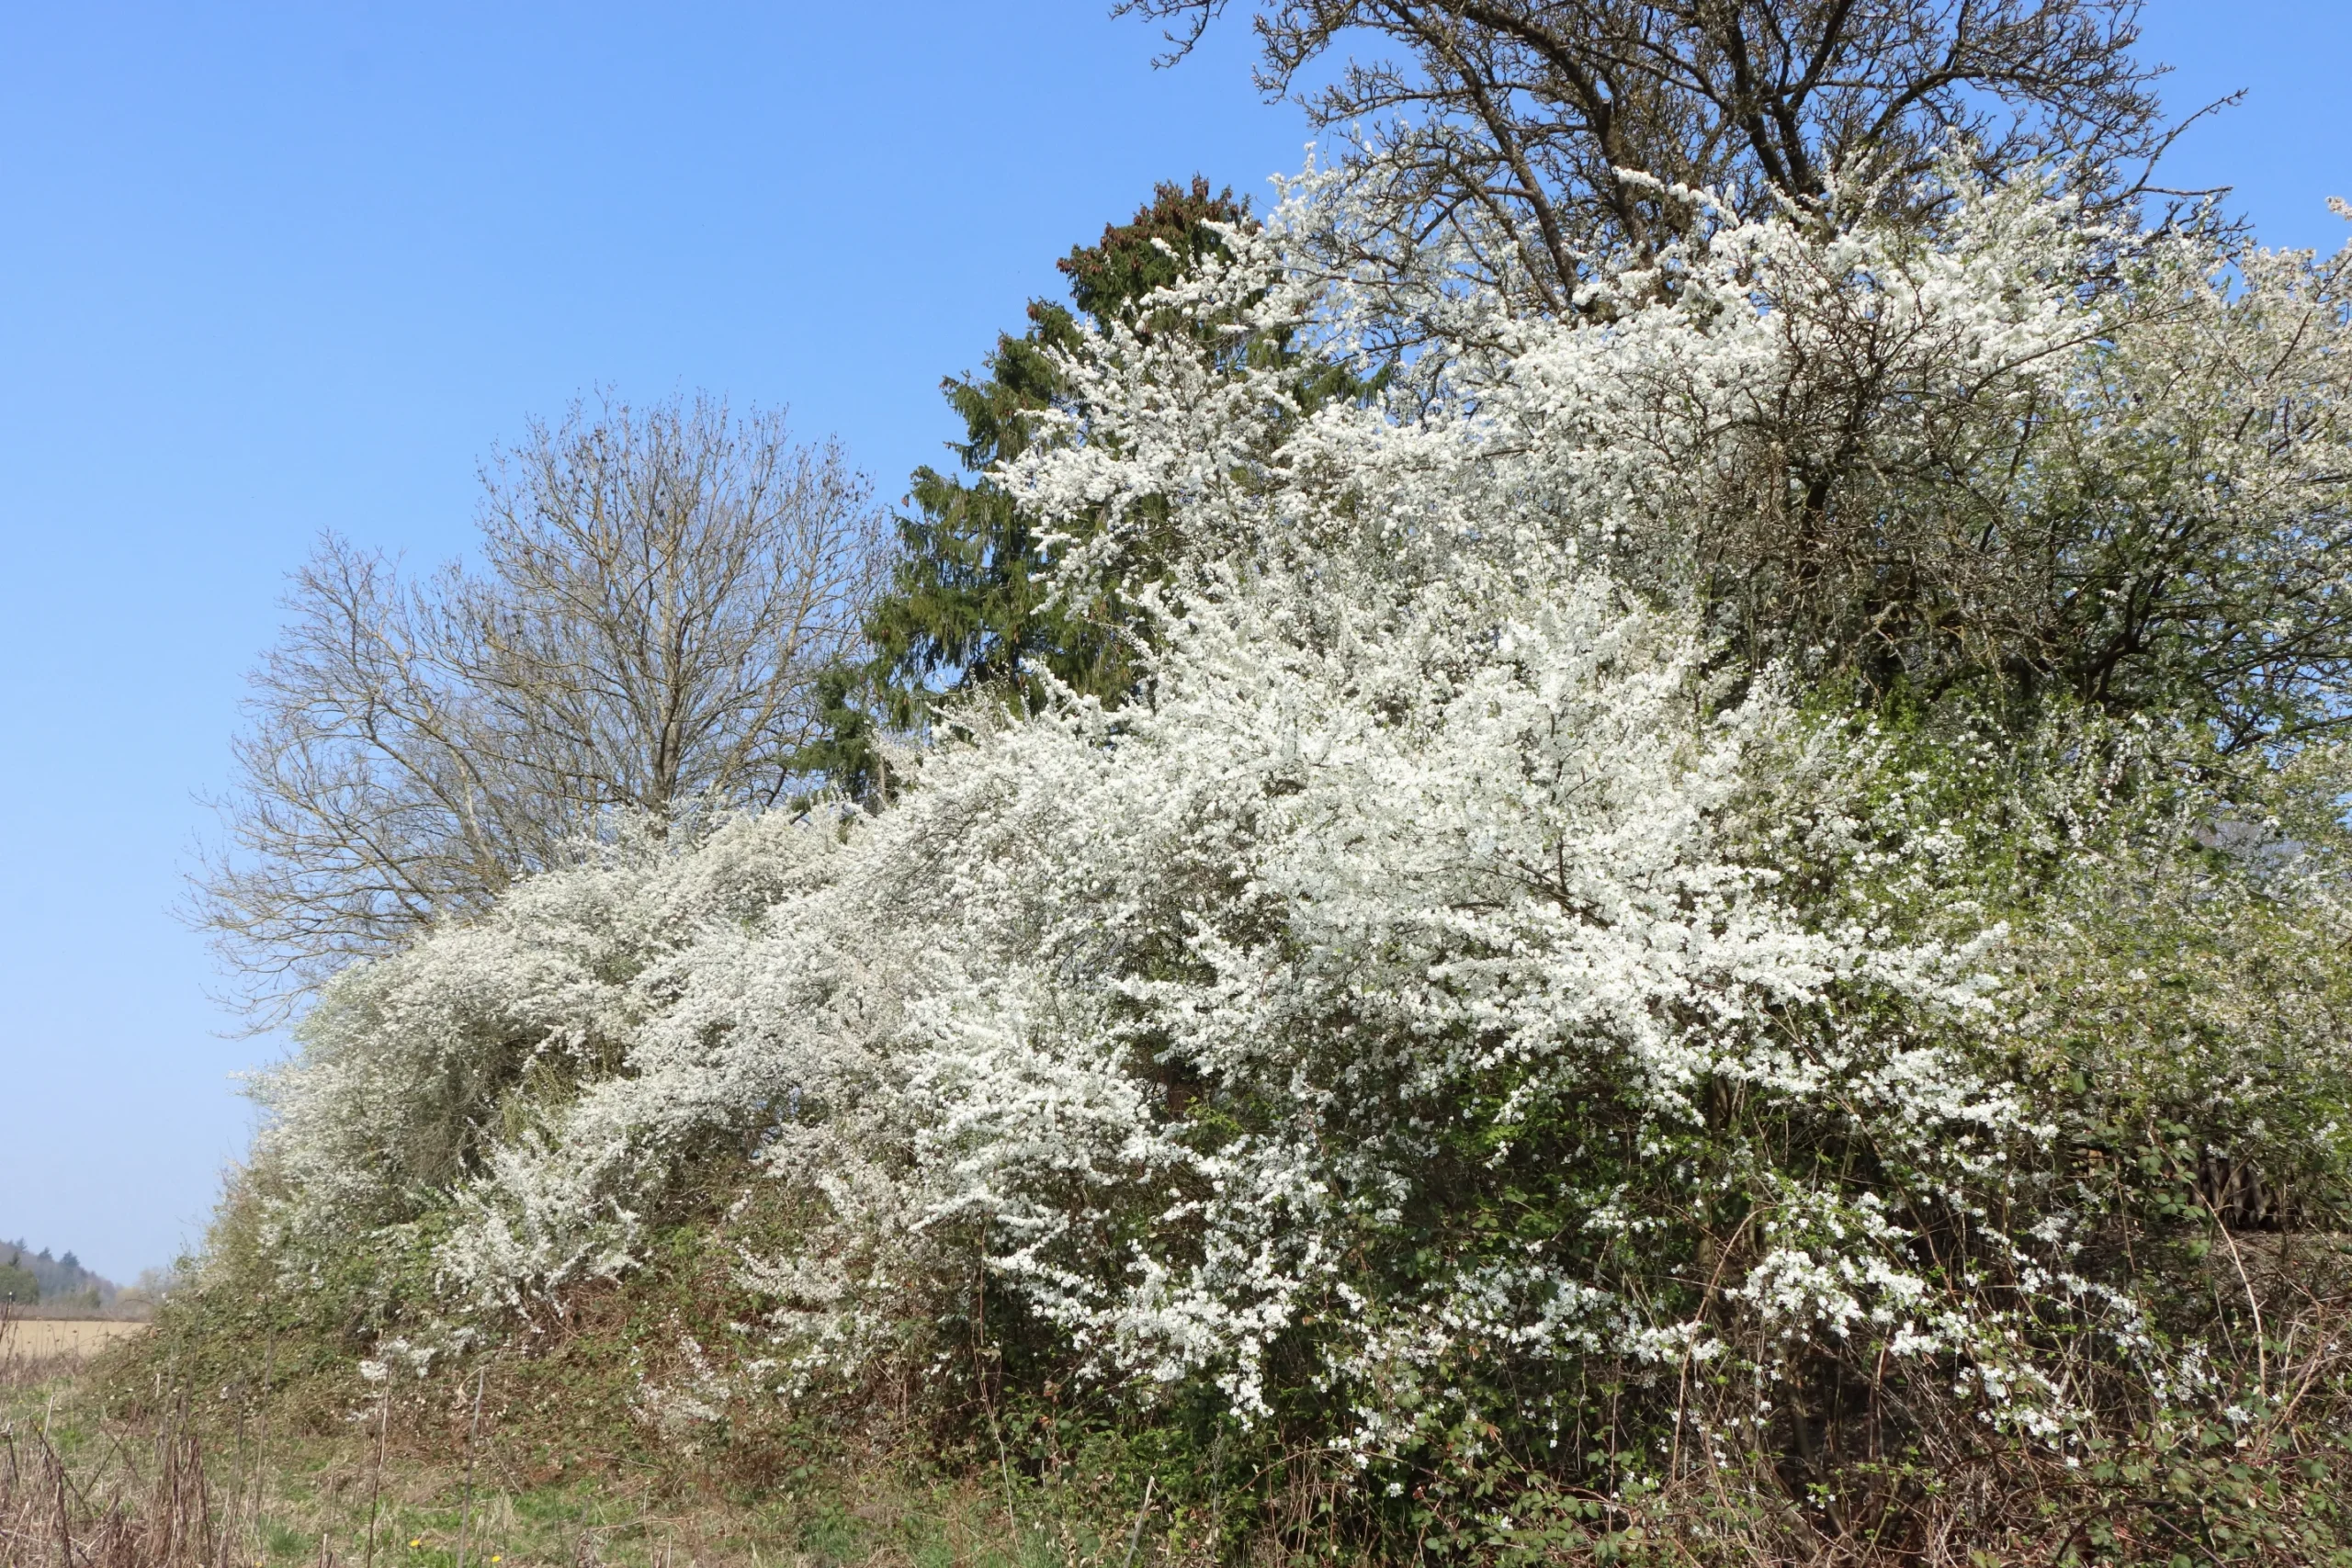 Cherry plum - a hedge with many different shrubs. In the background are large trees. The hedge consists of shrubs with white flowers. On the left edge of the picture are trees that are not yet in leaf. On the right edge of the picture is a black pear tree.